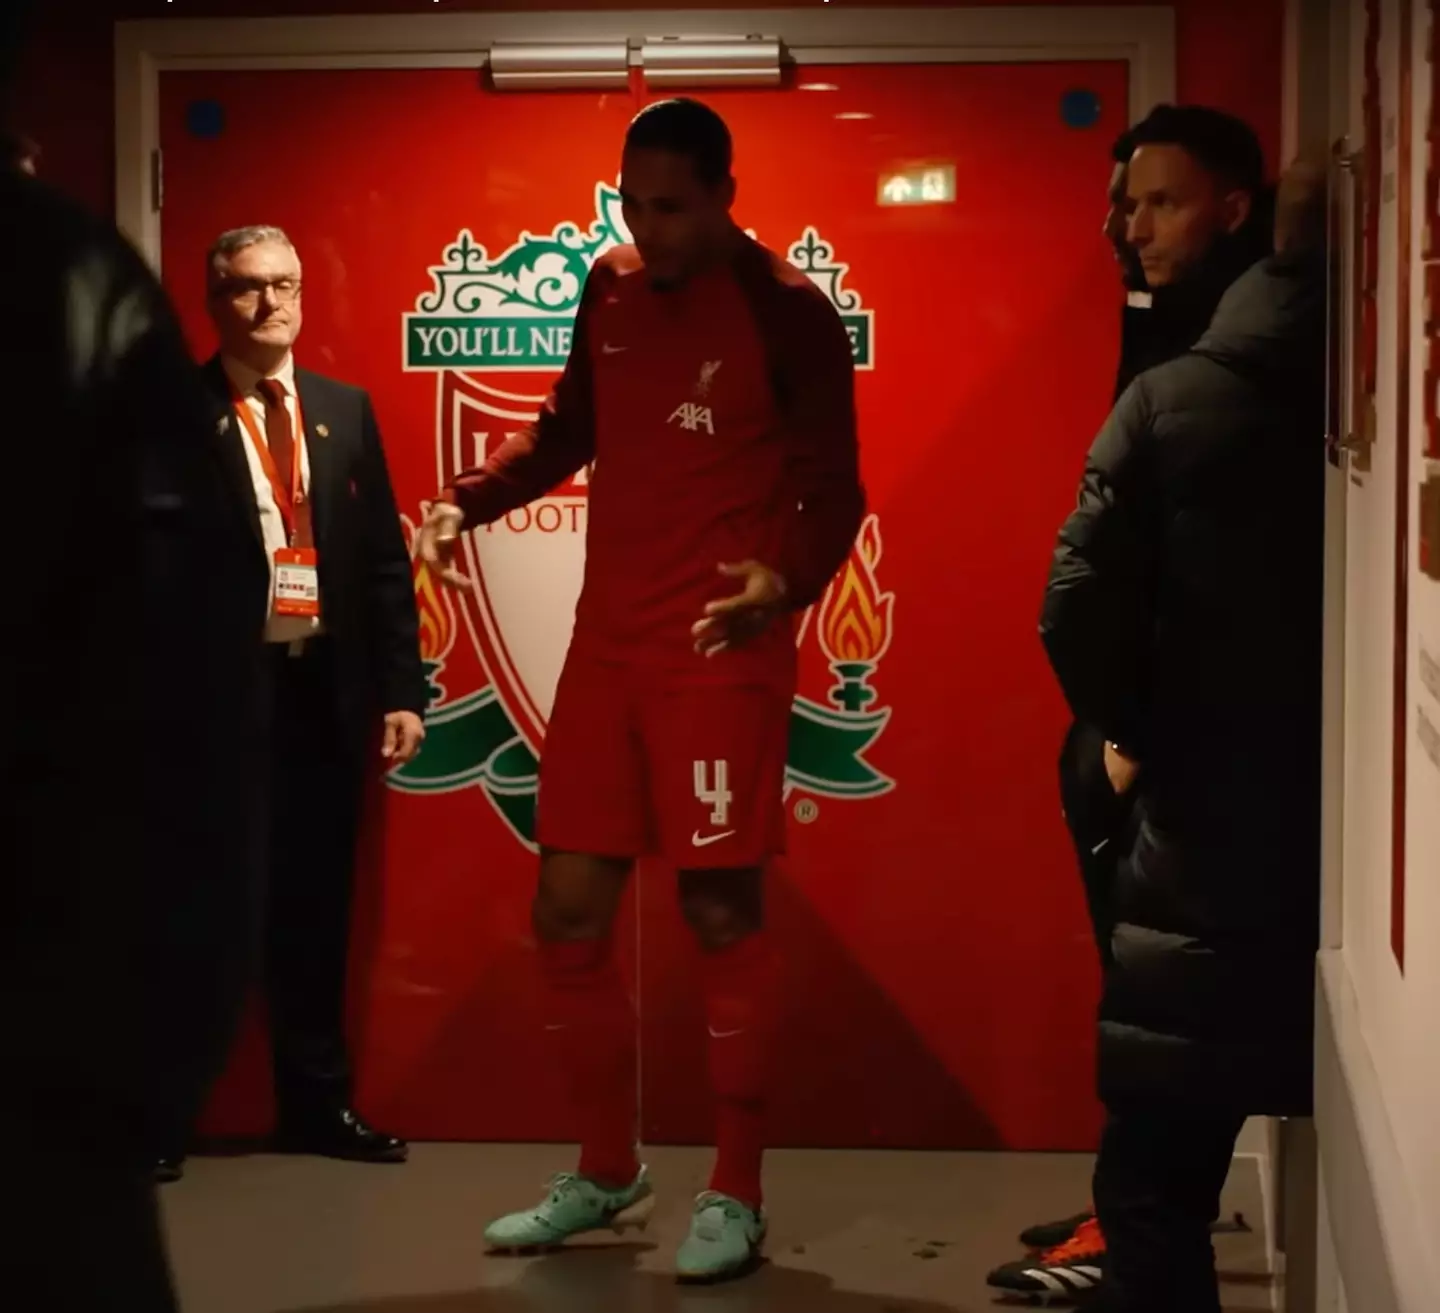 Image credit: YouTube/Liverpool FC